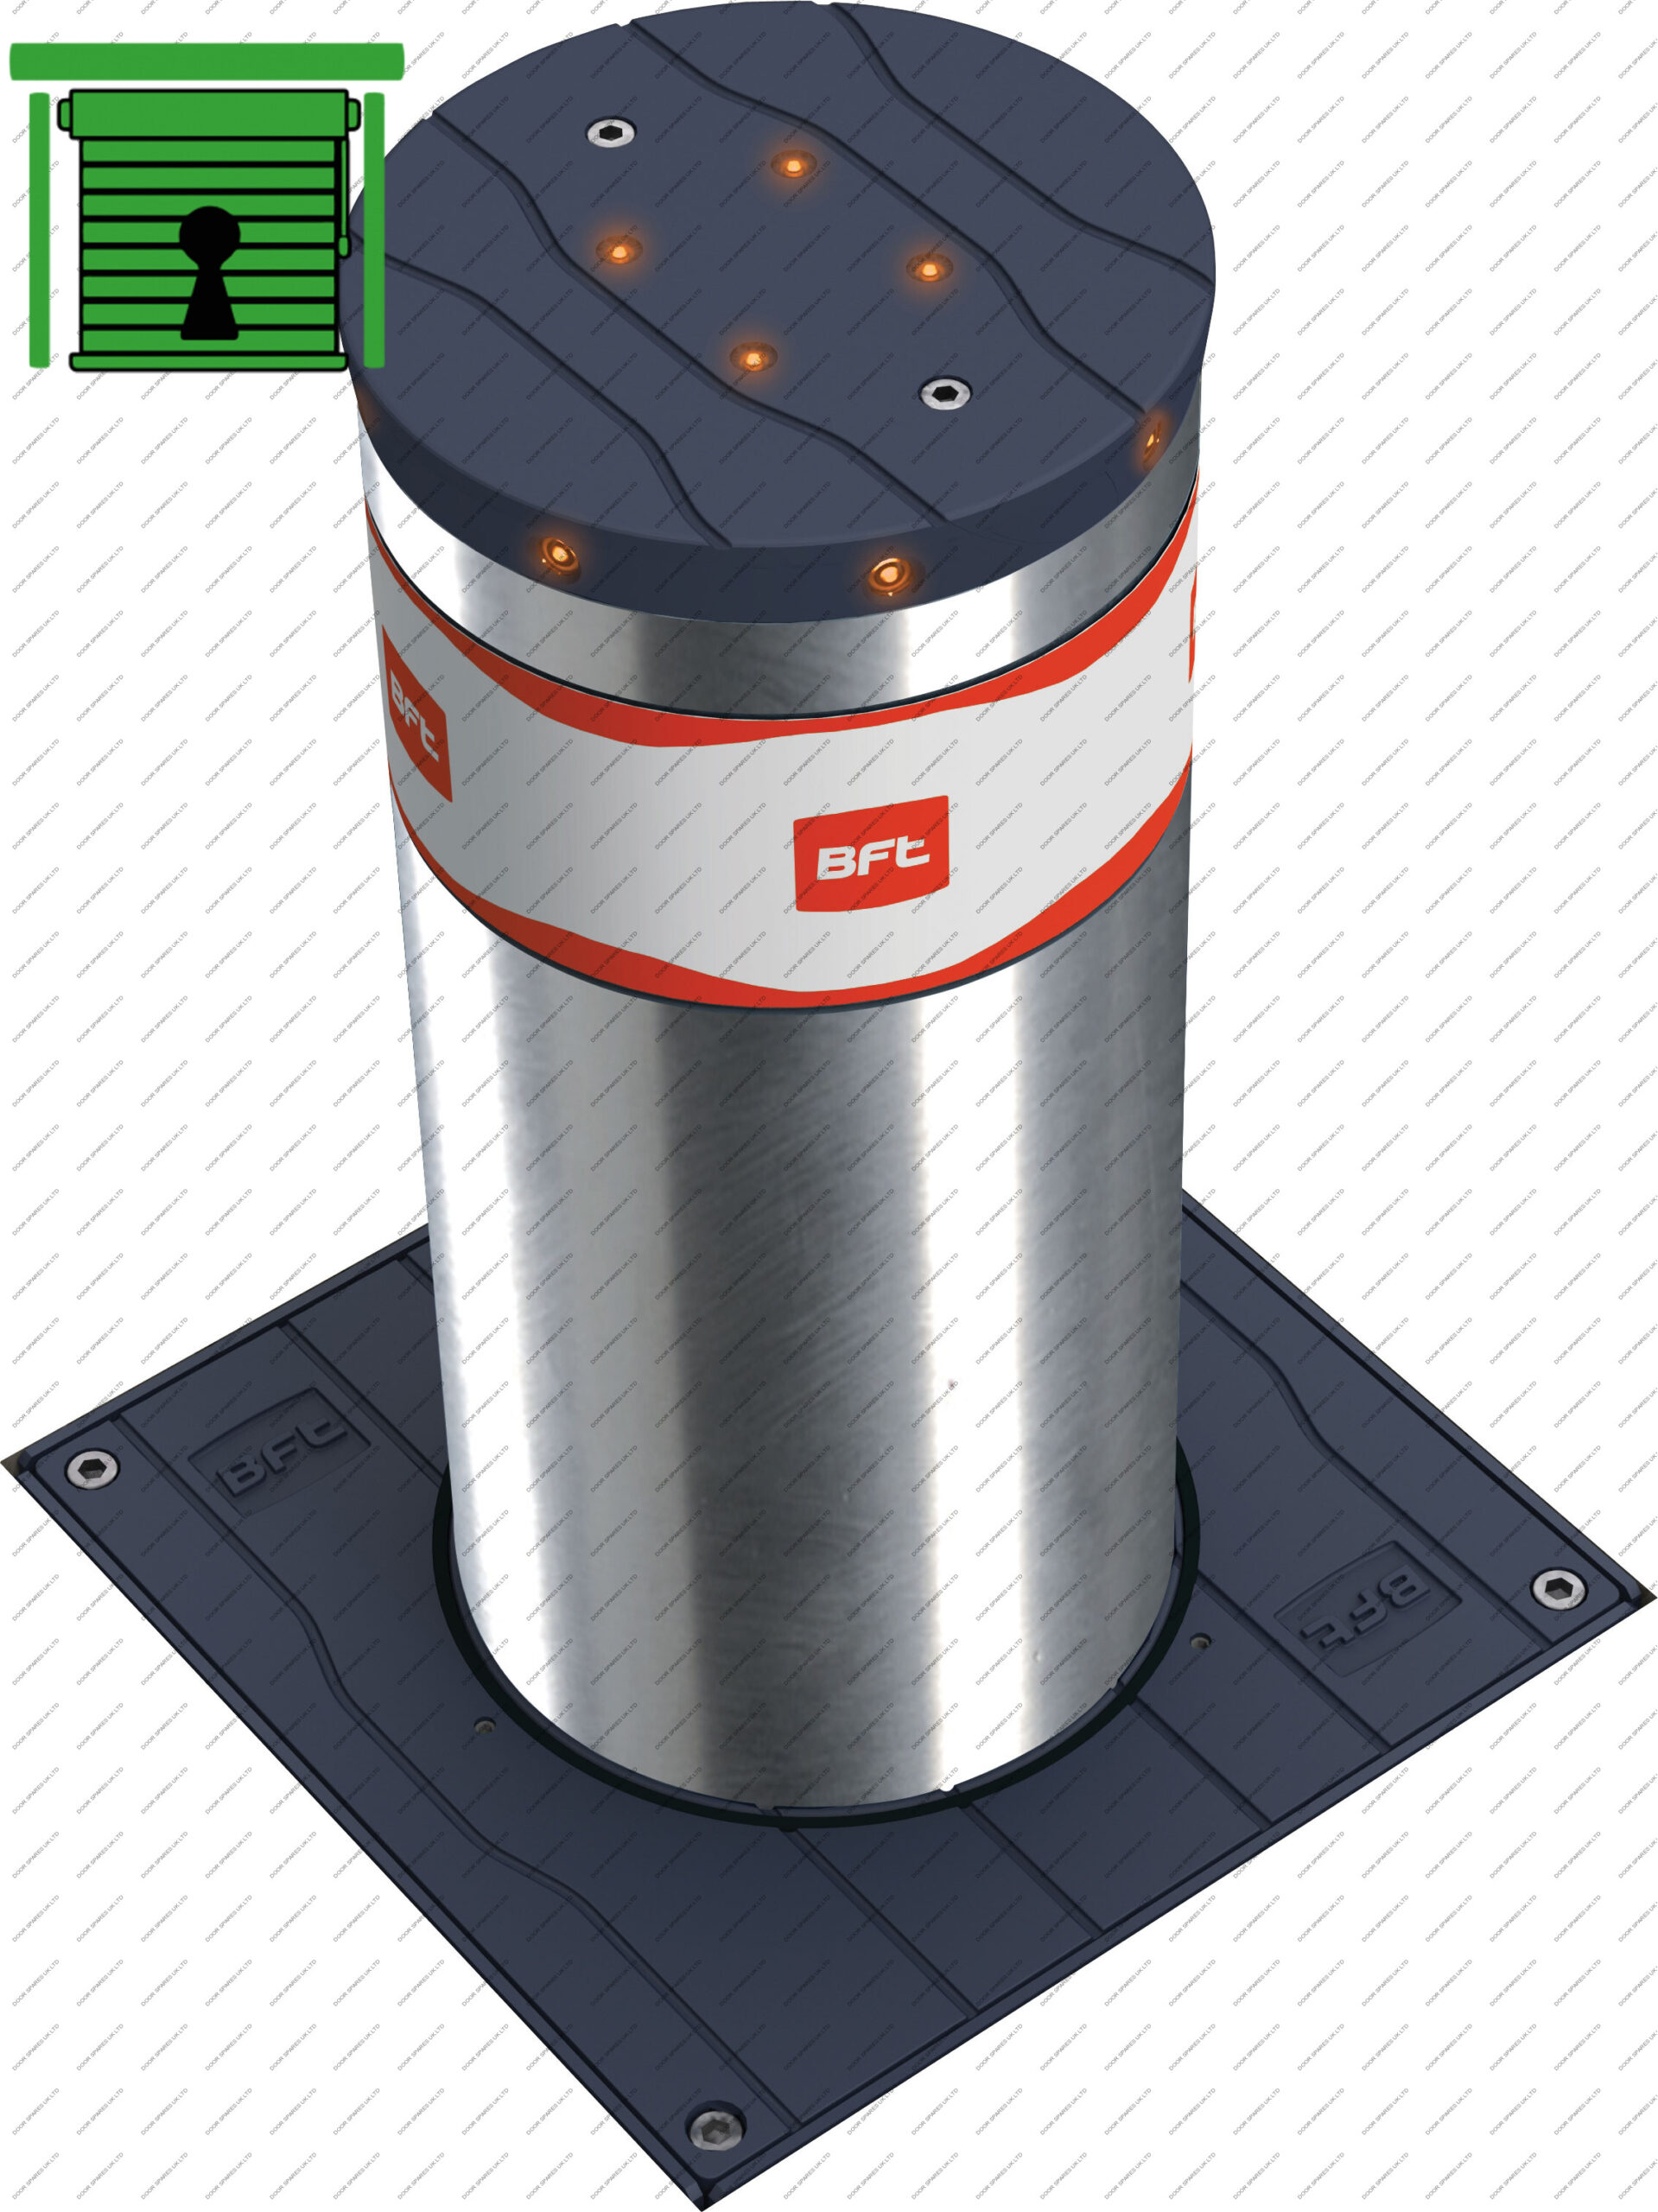 BFT STOPPY 700 MBB 700 X 220 ELECTROMECHANICAL AUTOMATIC BOLLARD STAINLESS STEEL WITH LIGHTING